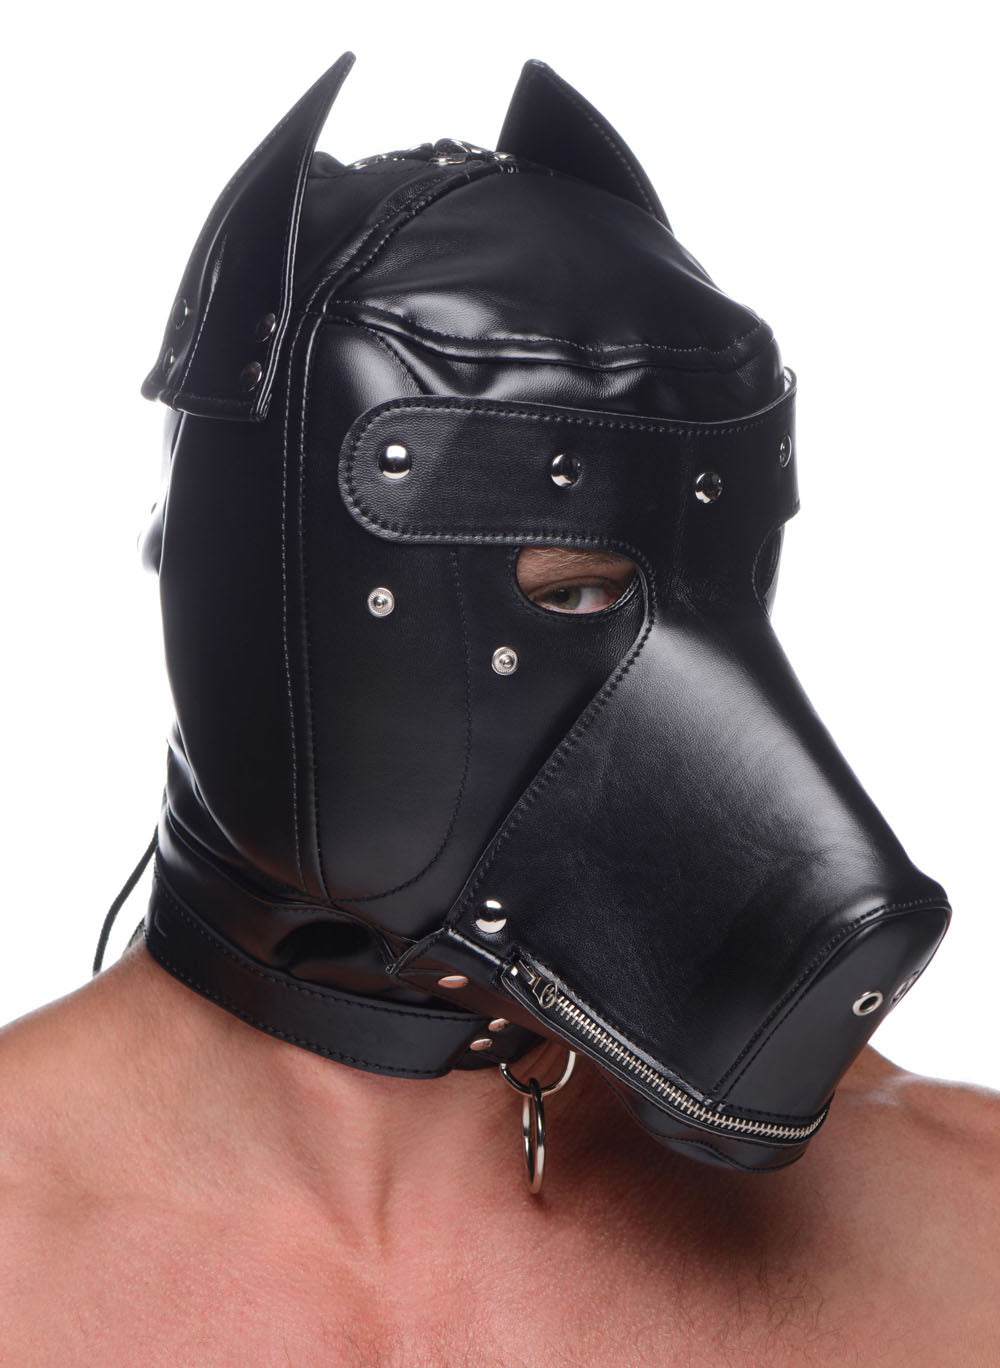 Muzzled Universal BDSM Hood With Removable Muzzle-5